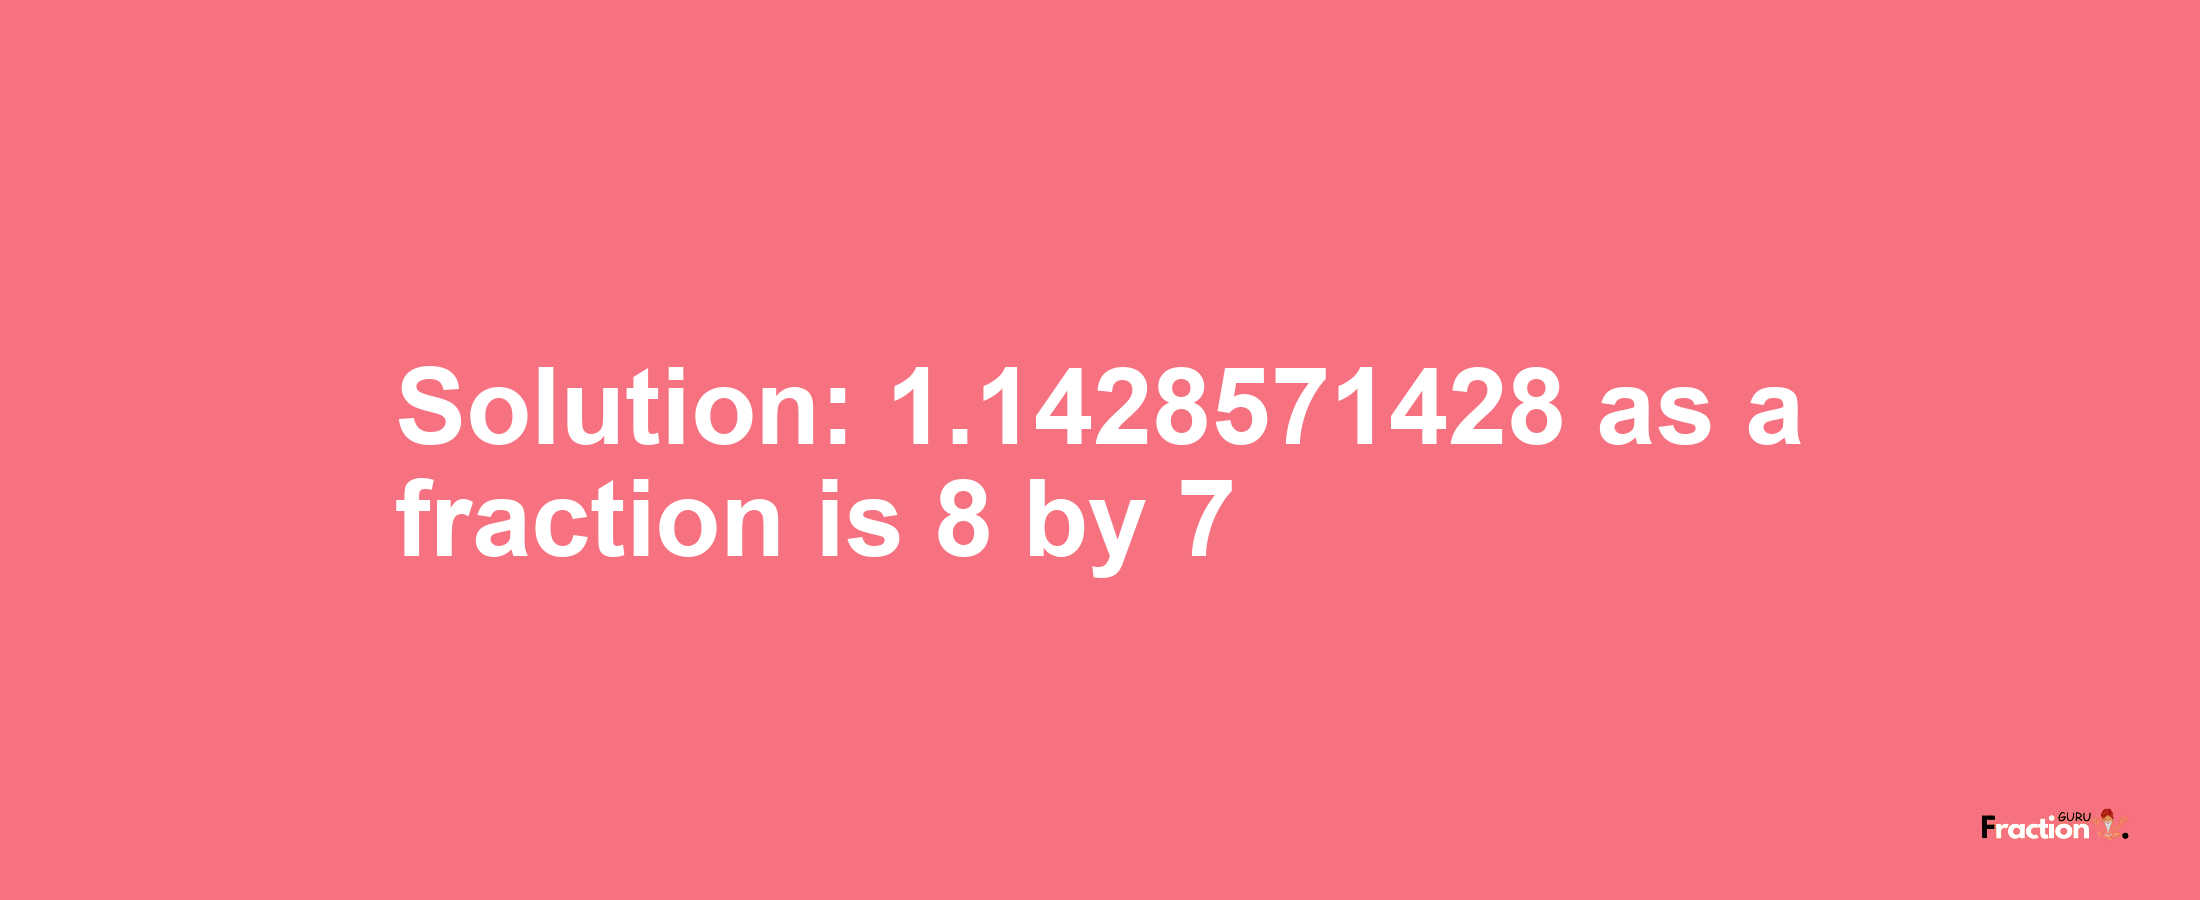 Solution:1.1428571428 as a fraction is 8/7